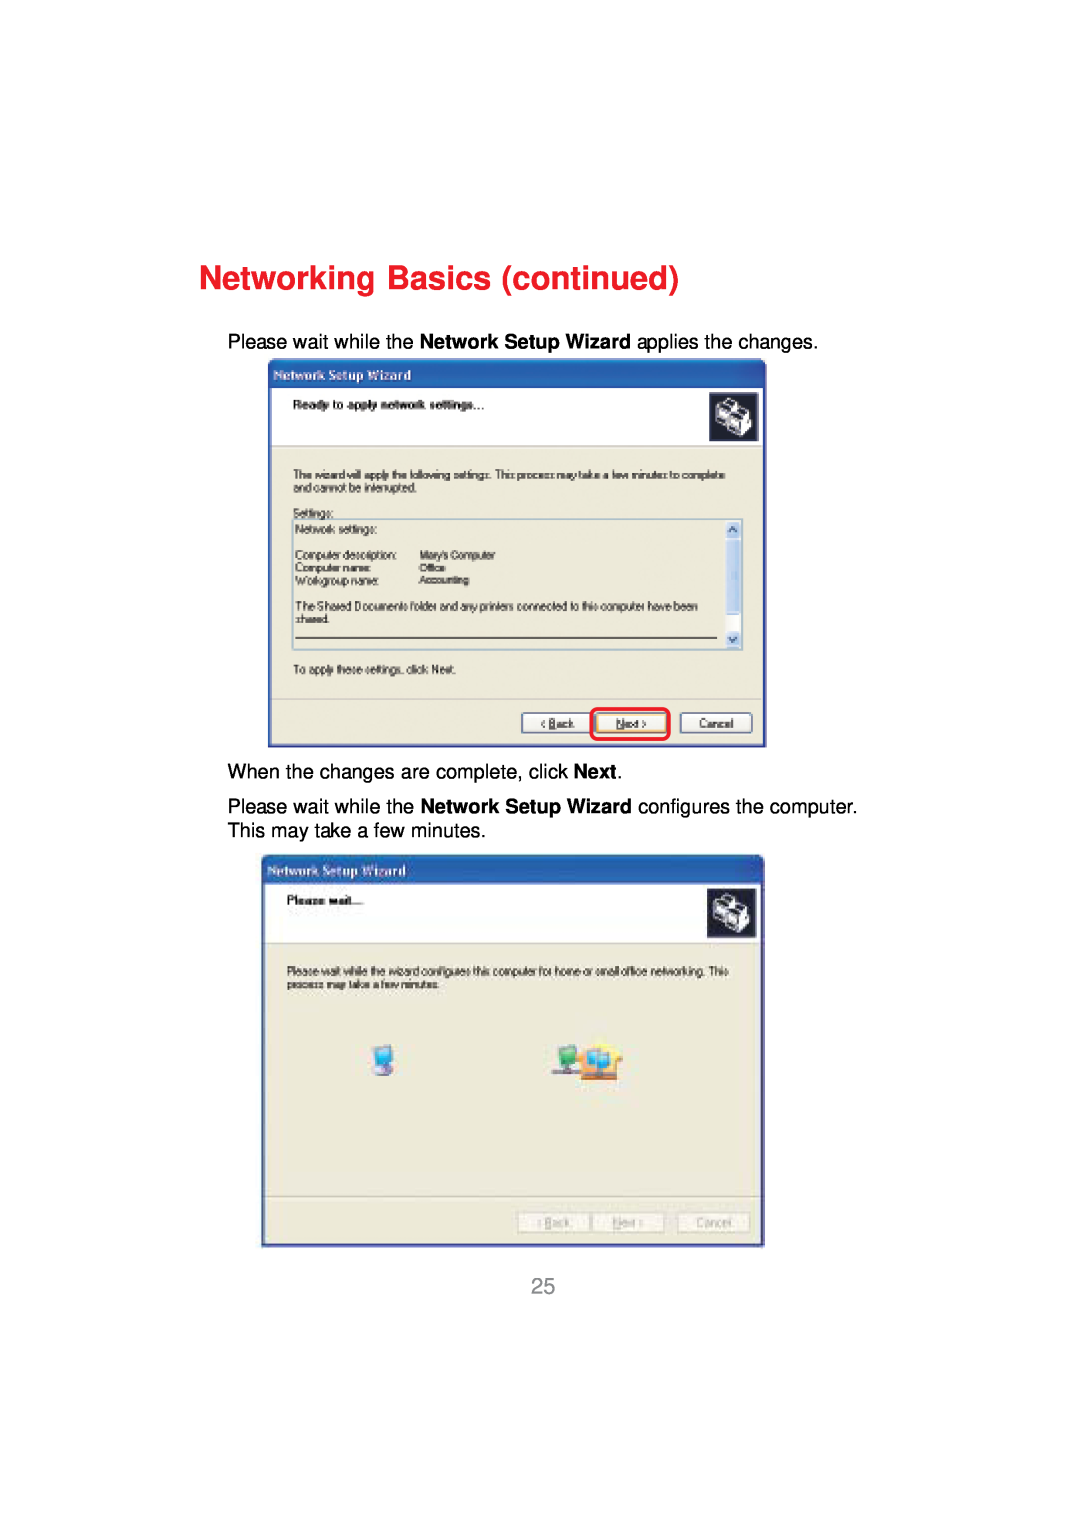 D-Link DWL-AG530 manual Networking Basics continued, Please wait while the Network Setup Wizard applies the changes 